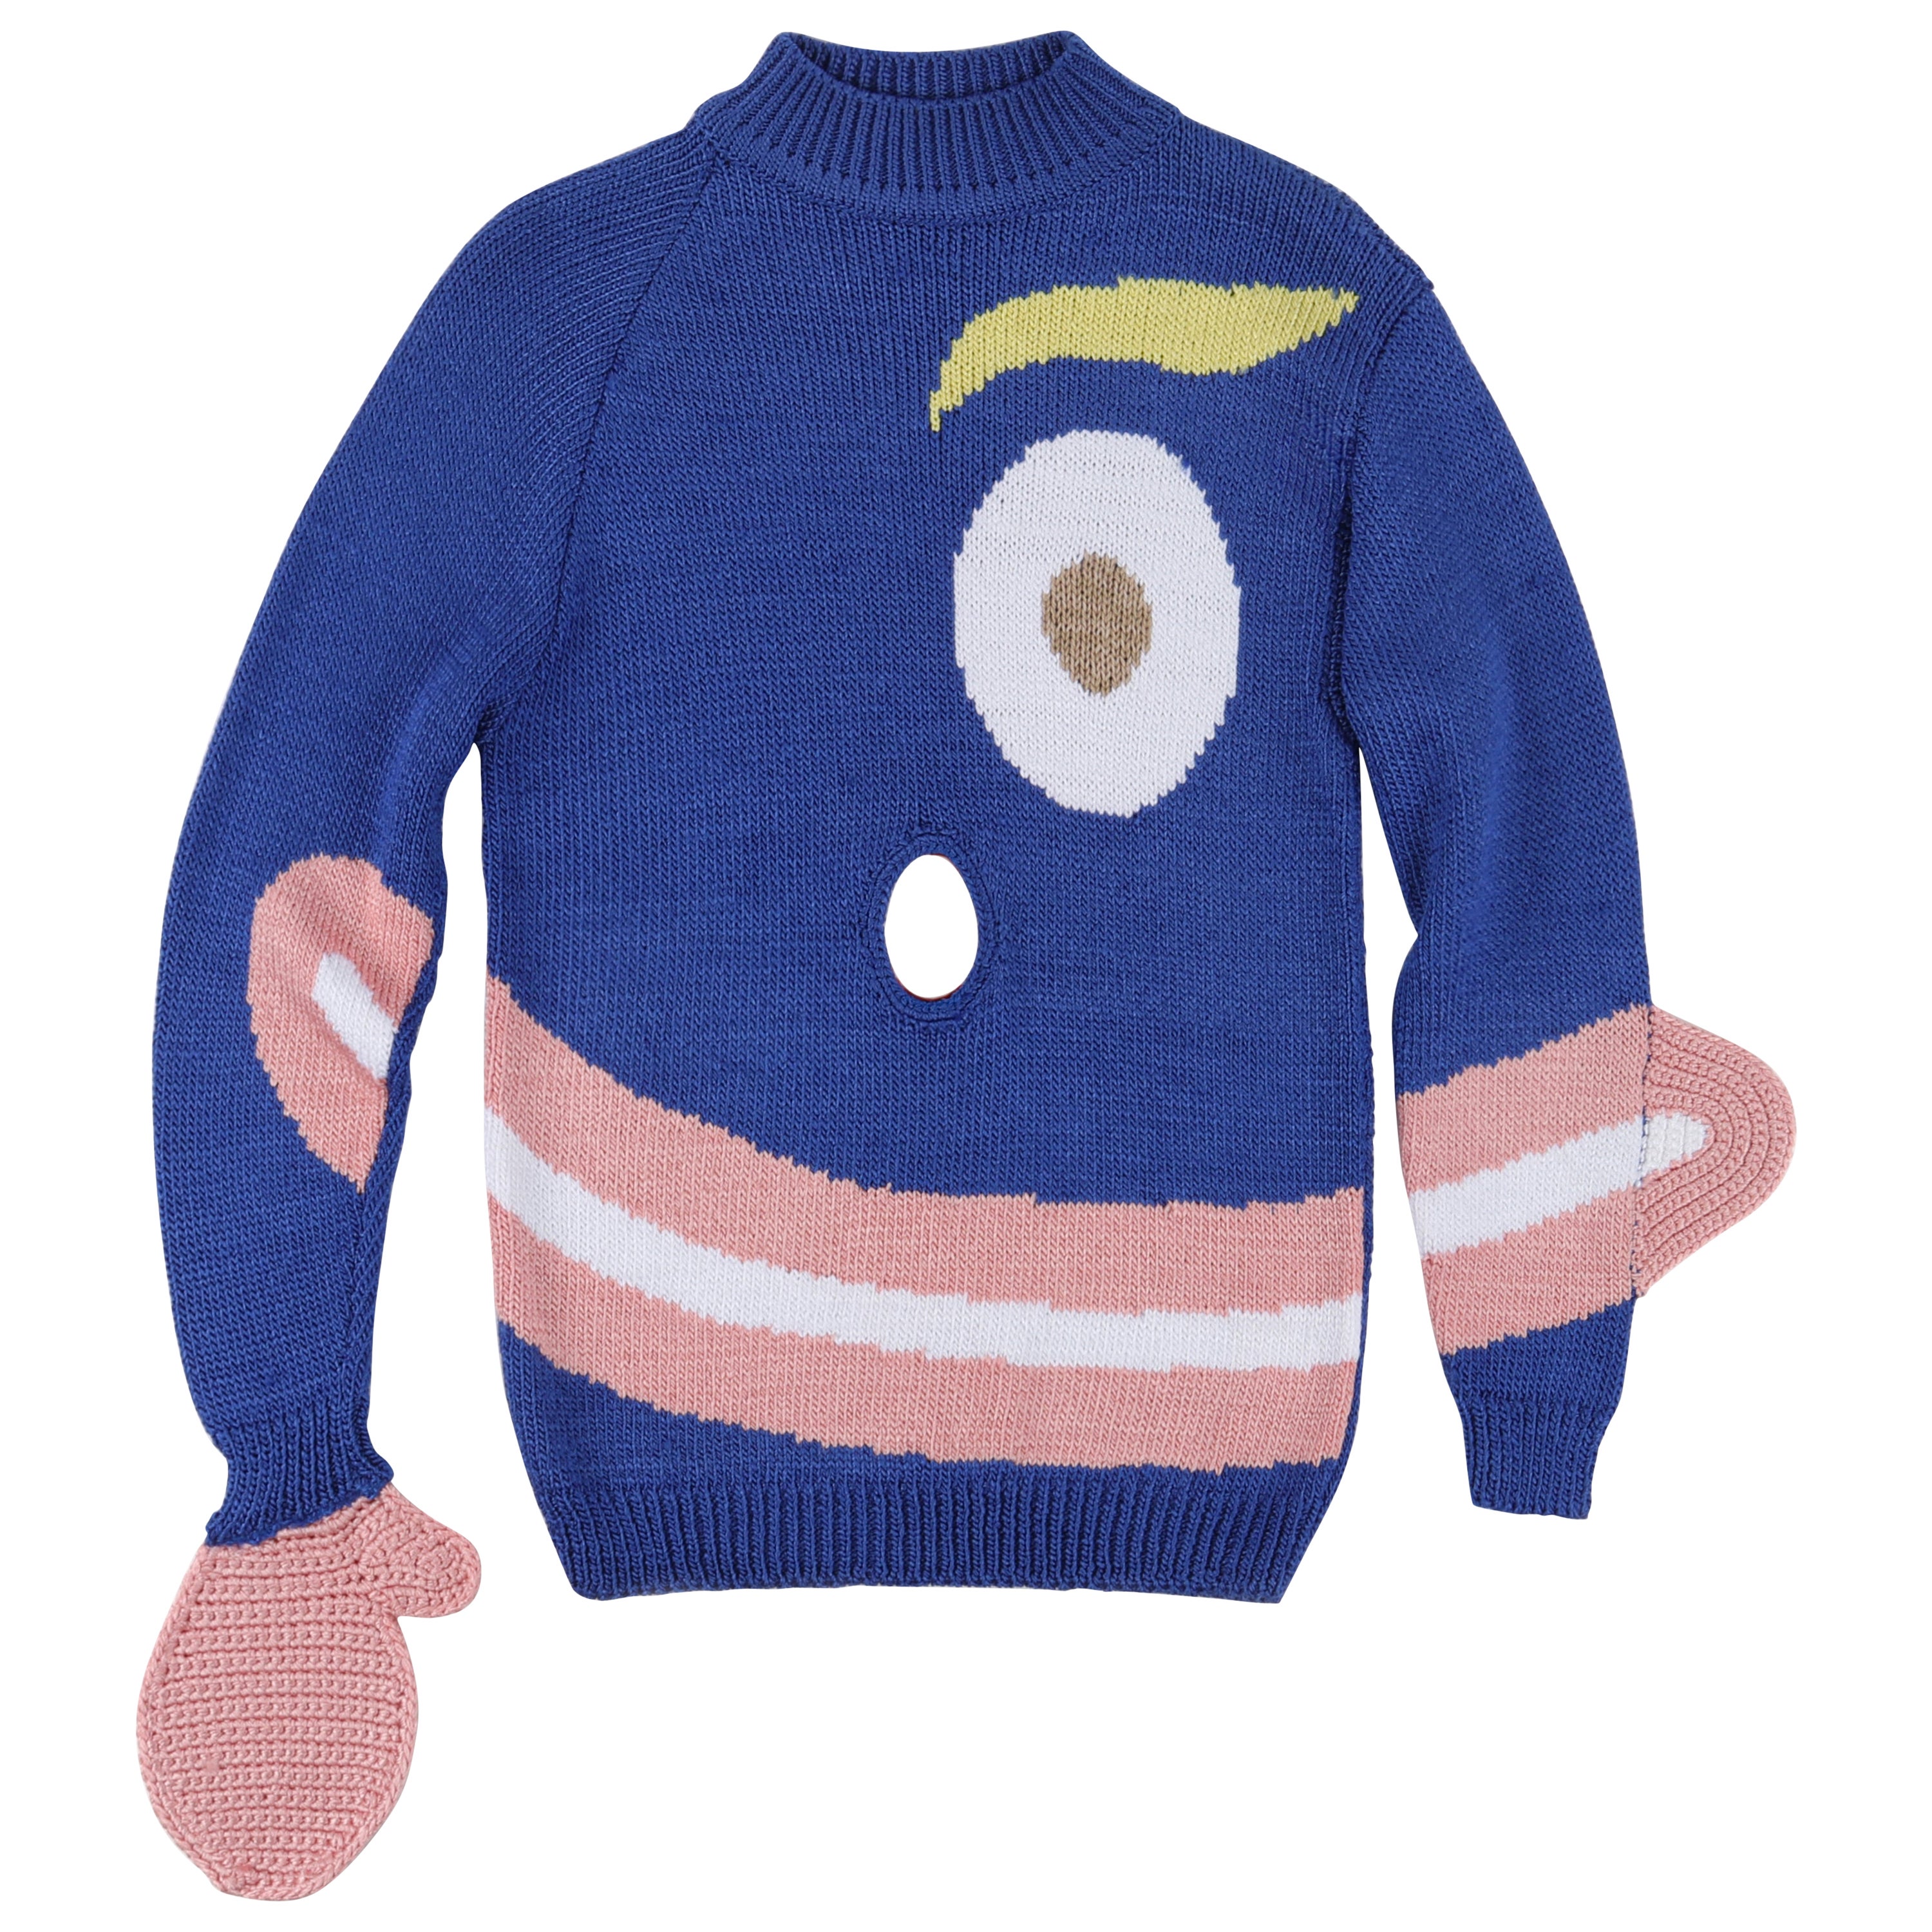 SURVIVAL OF THE FASHIONEST S/S 2020 Blue Knit Smiley Face Pullover Sweater Top S For Sale